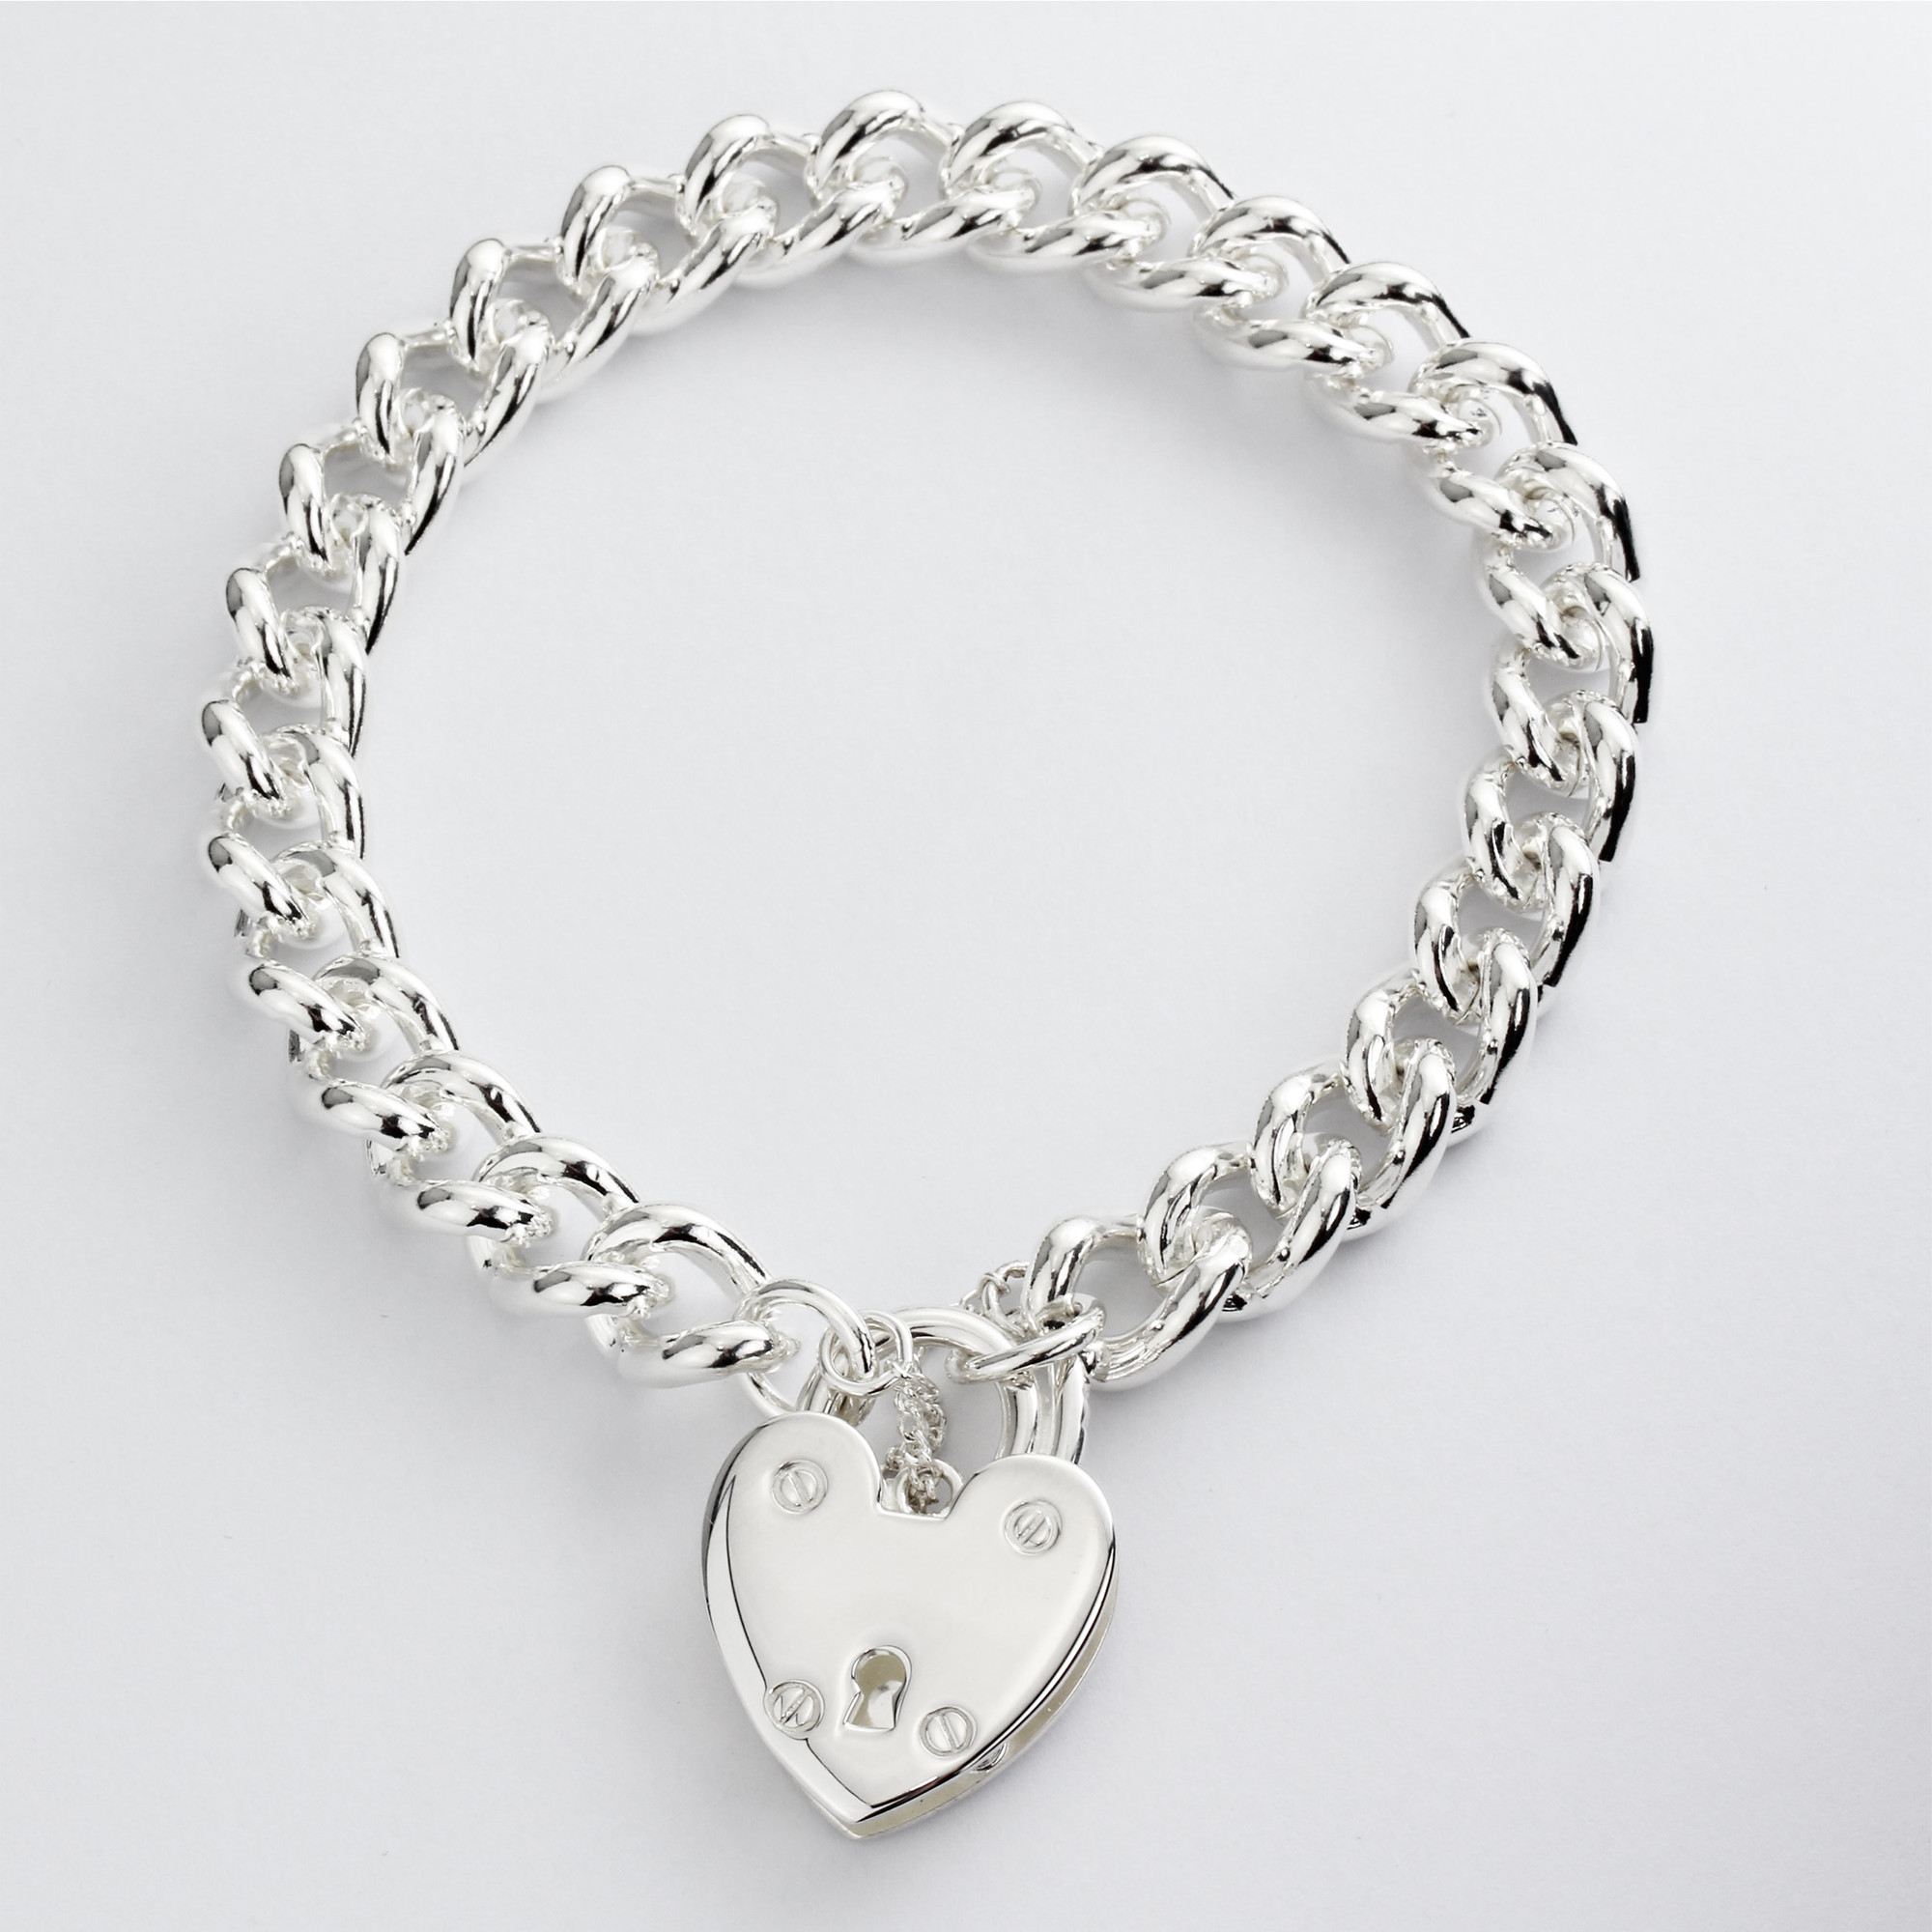 Heavy Solid Silver Charm Bracelet With Large Padlock Closure | Free